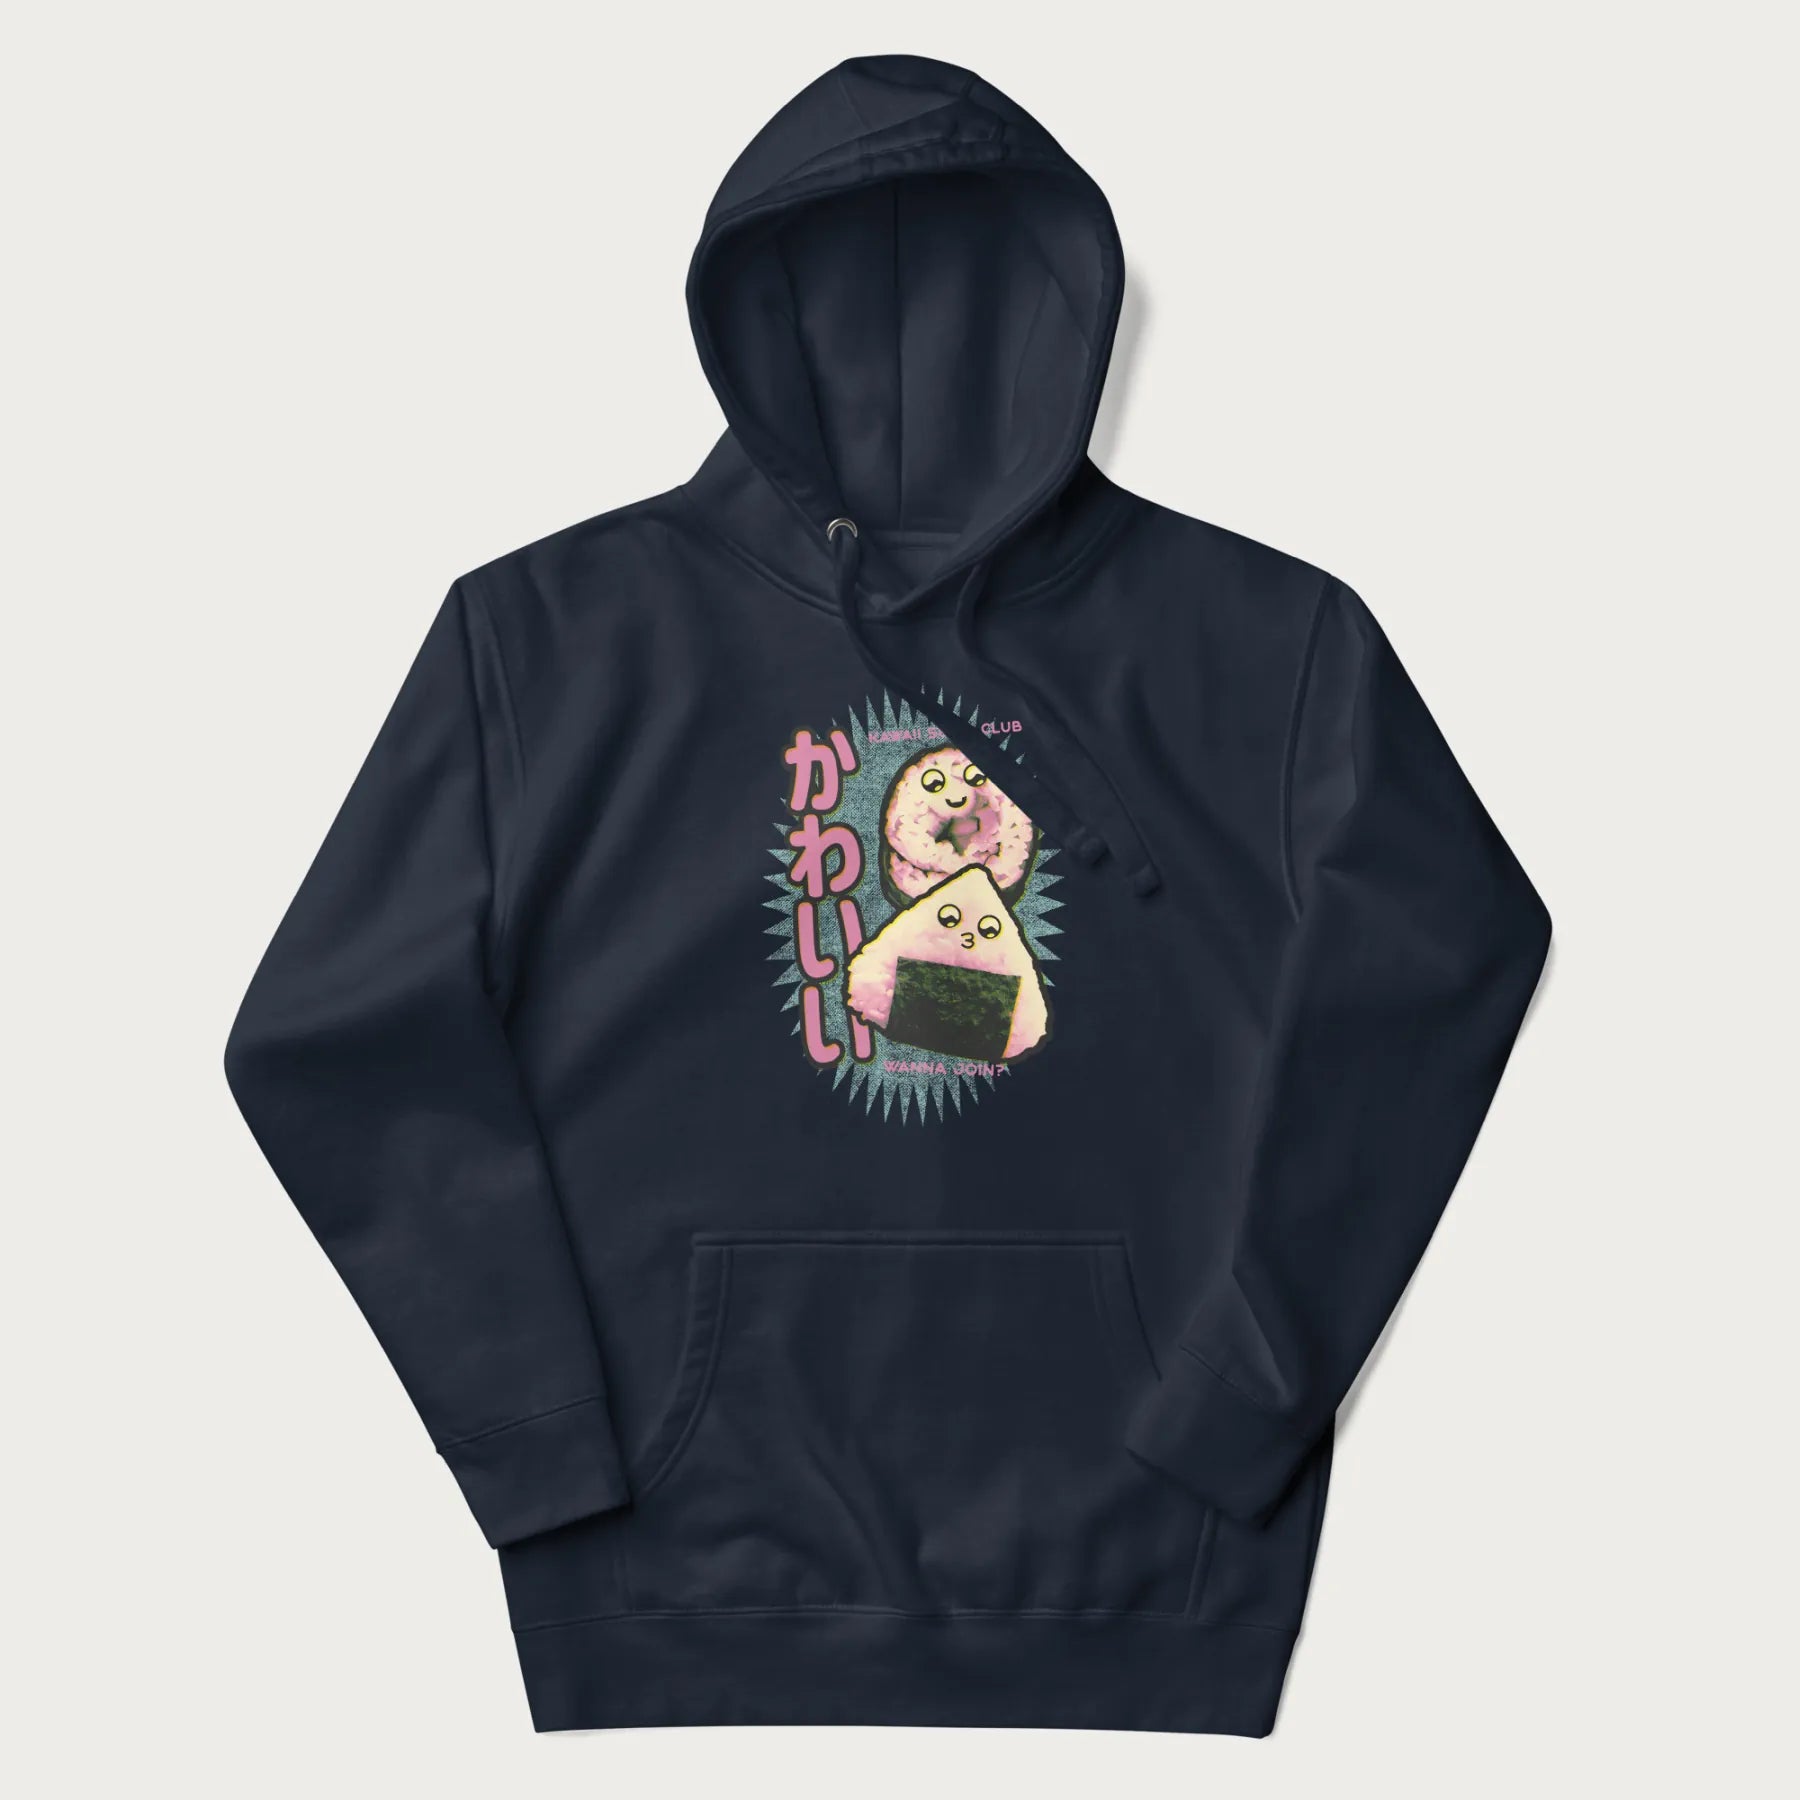 Navy blue hoodie featuring a cute sushi and onigiri graphic with the text "Kawaii Sushi Club", colorful neon accents and Japanese characters.